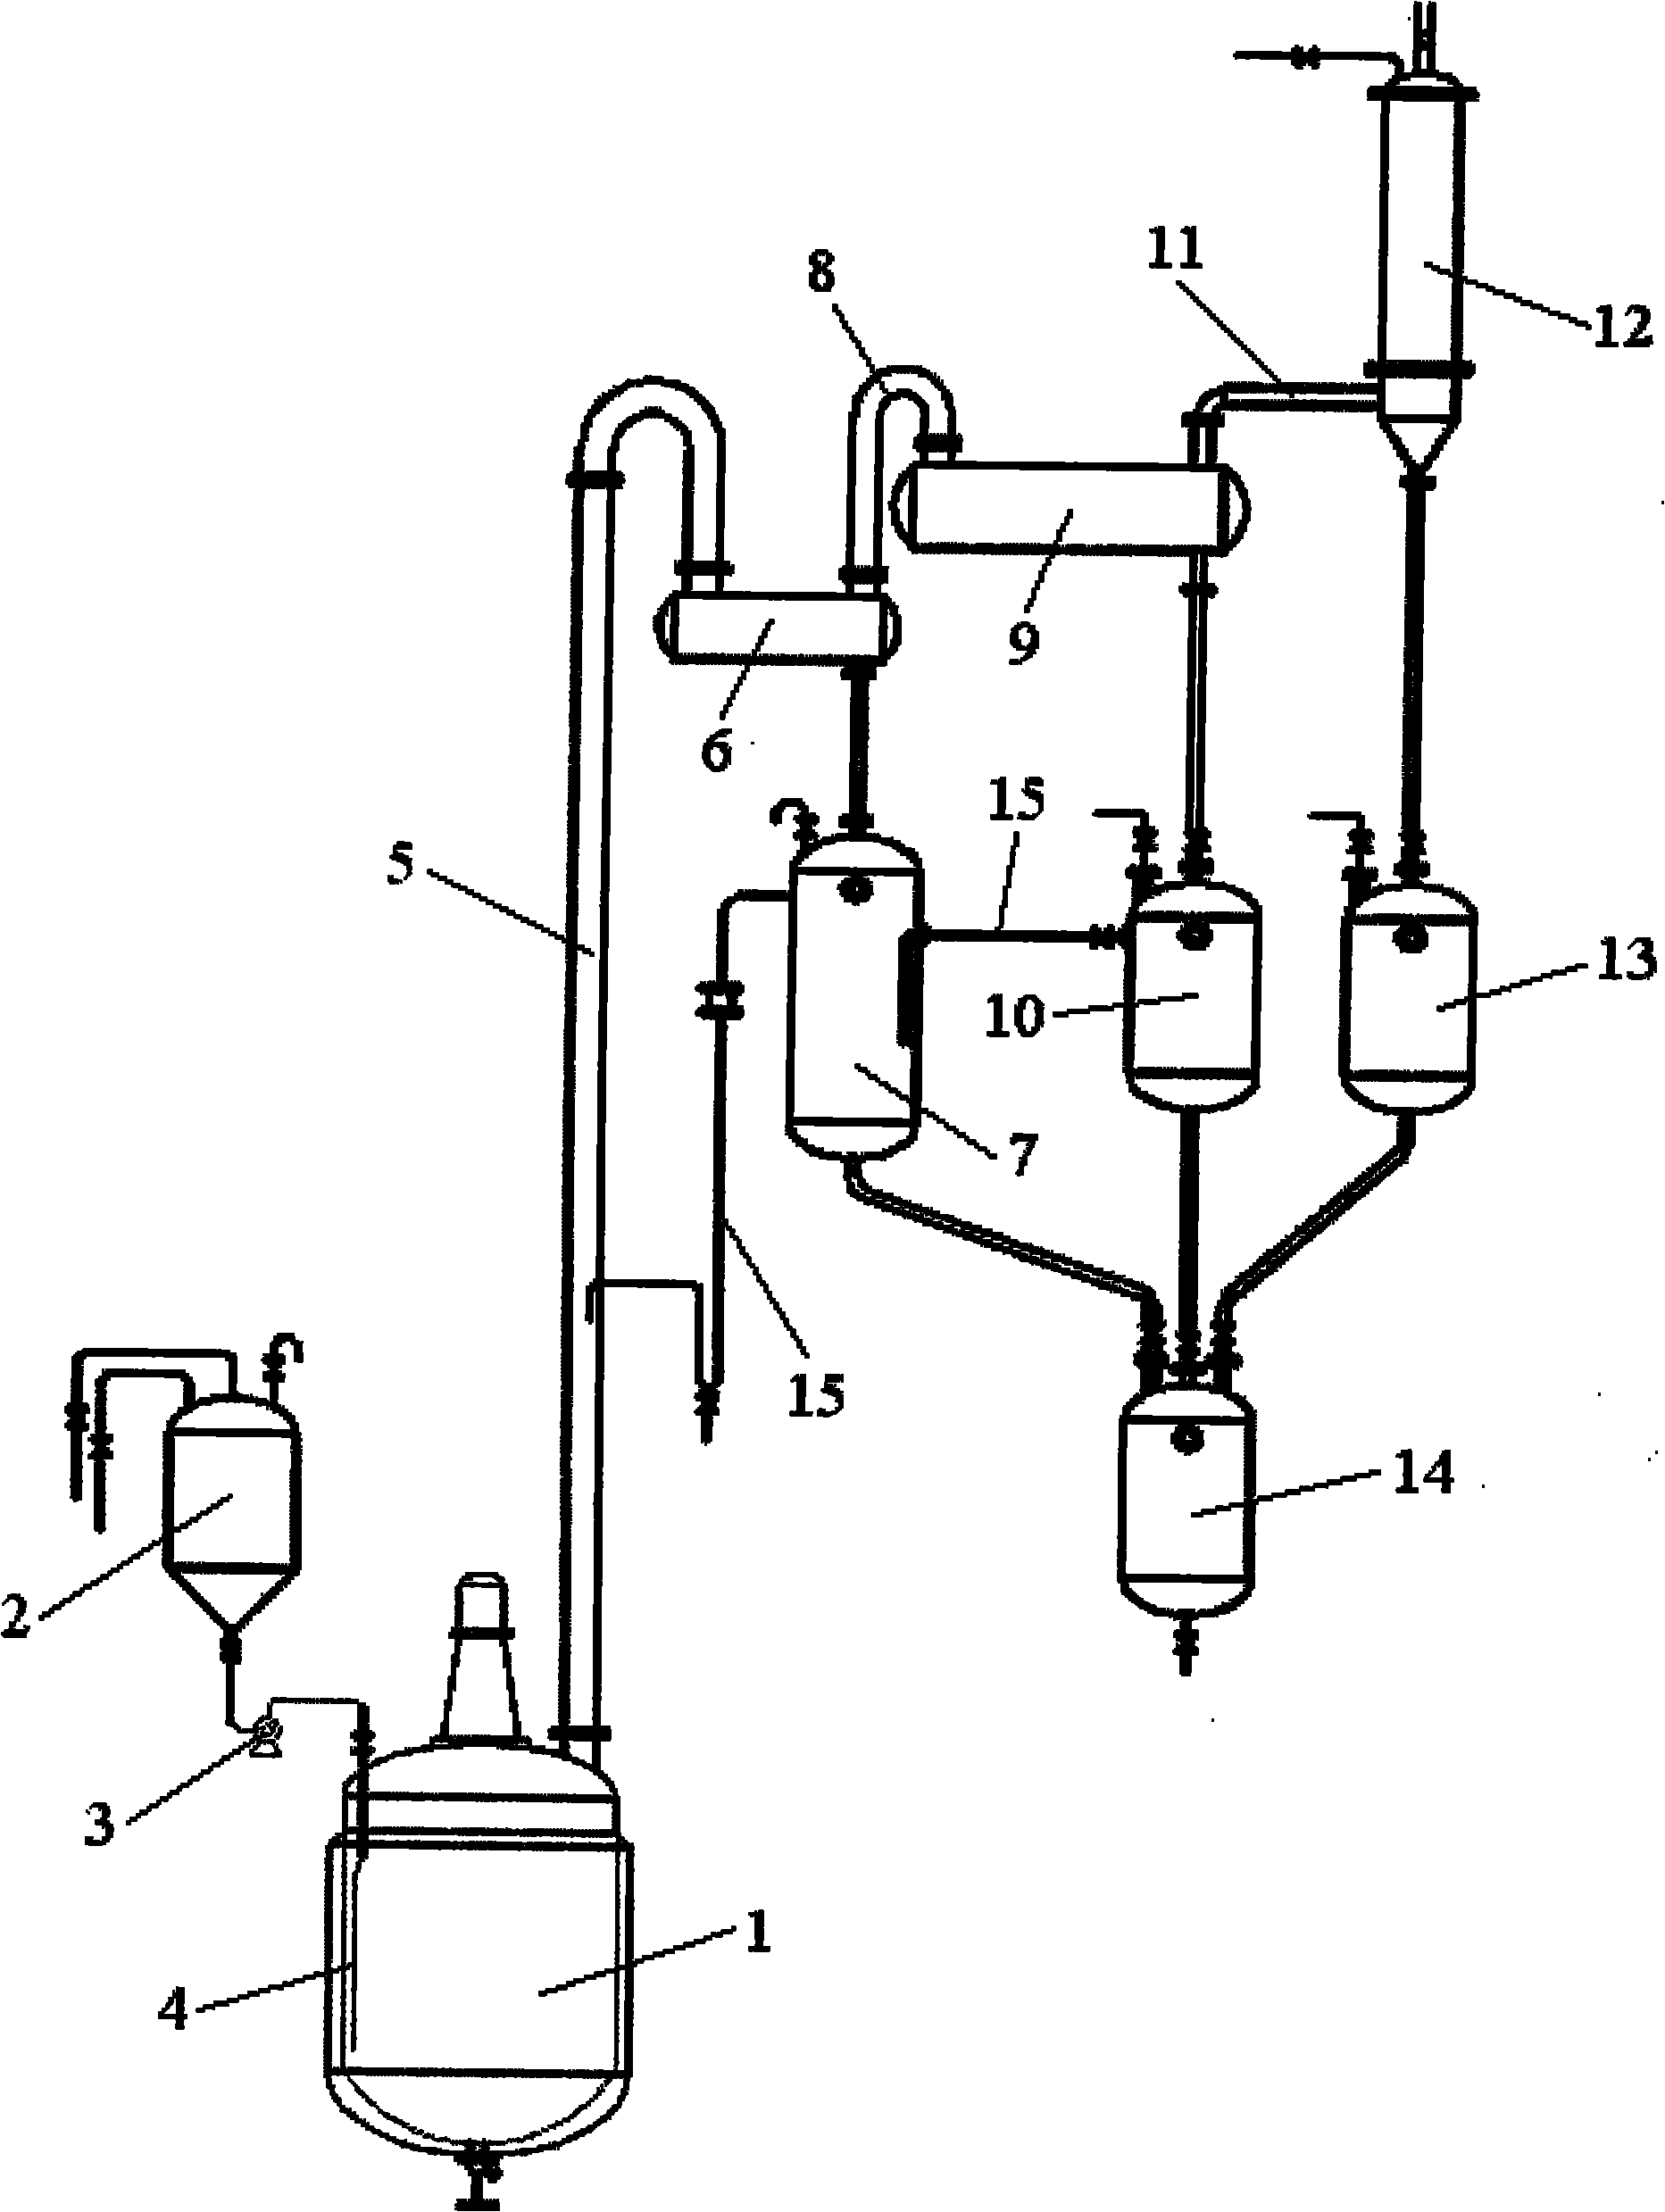 Production method for natural benzaldehyde